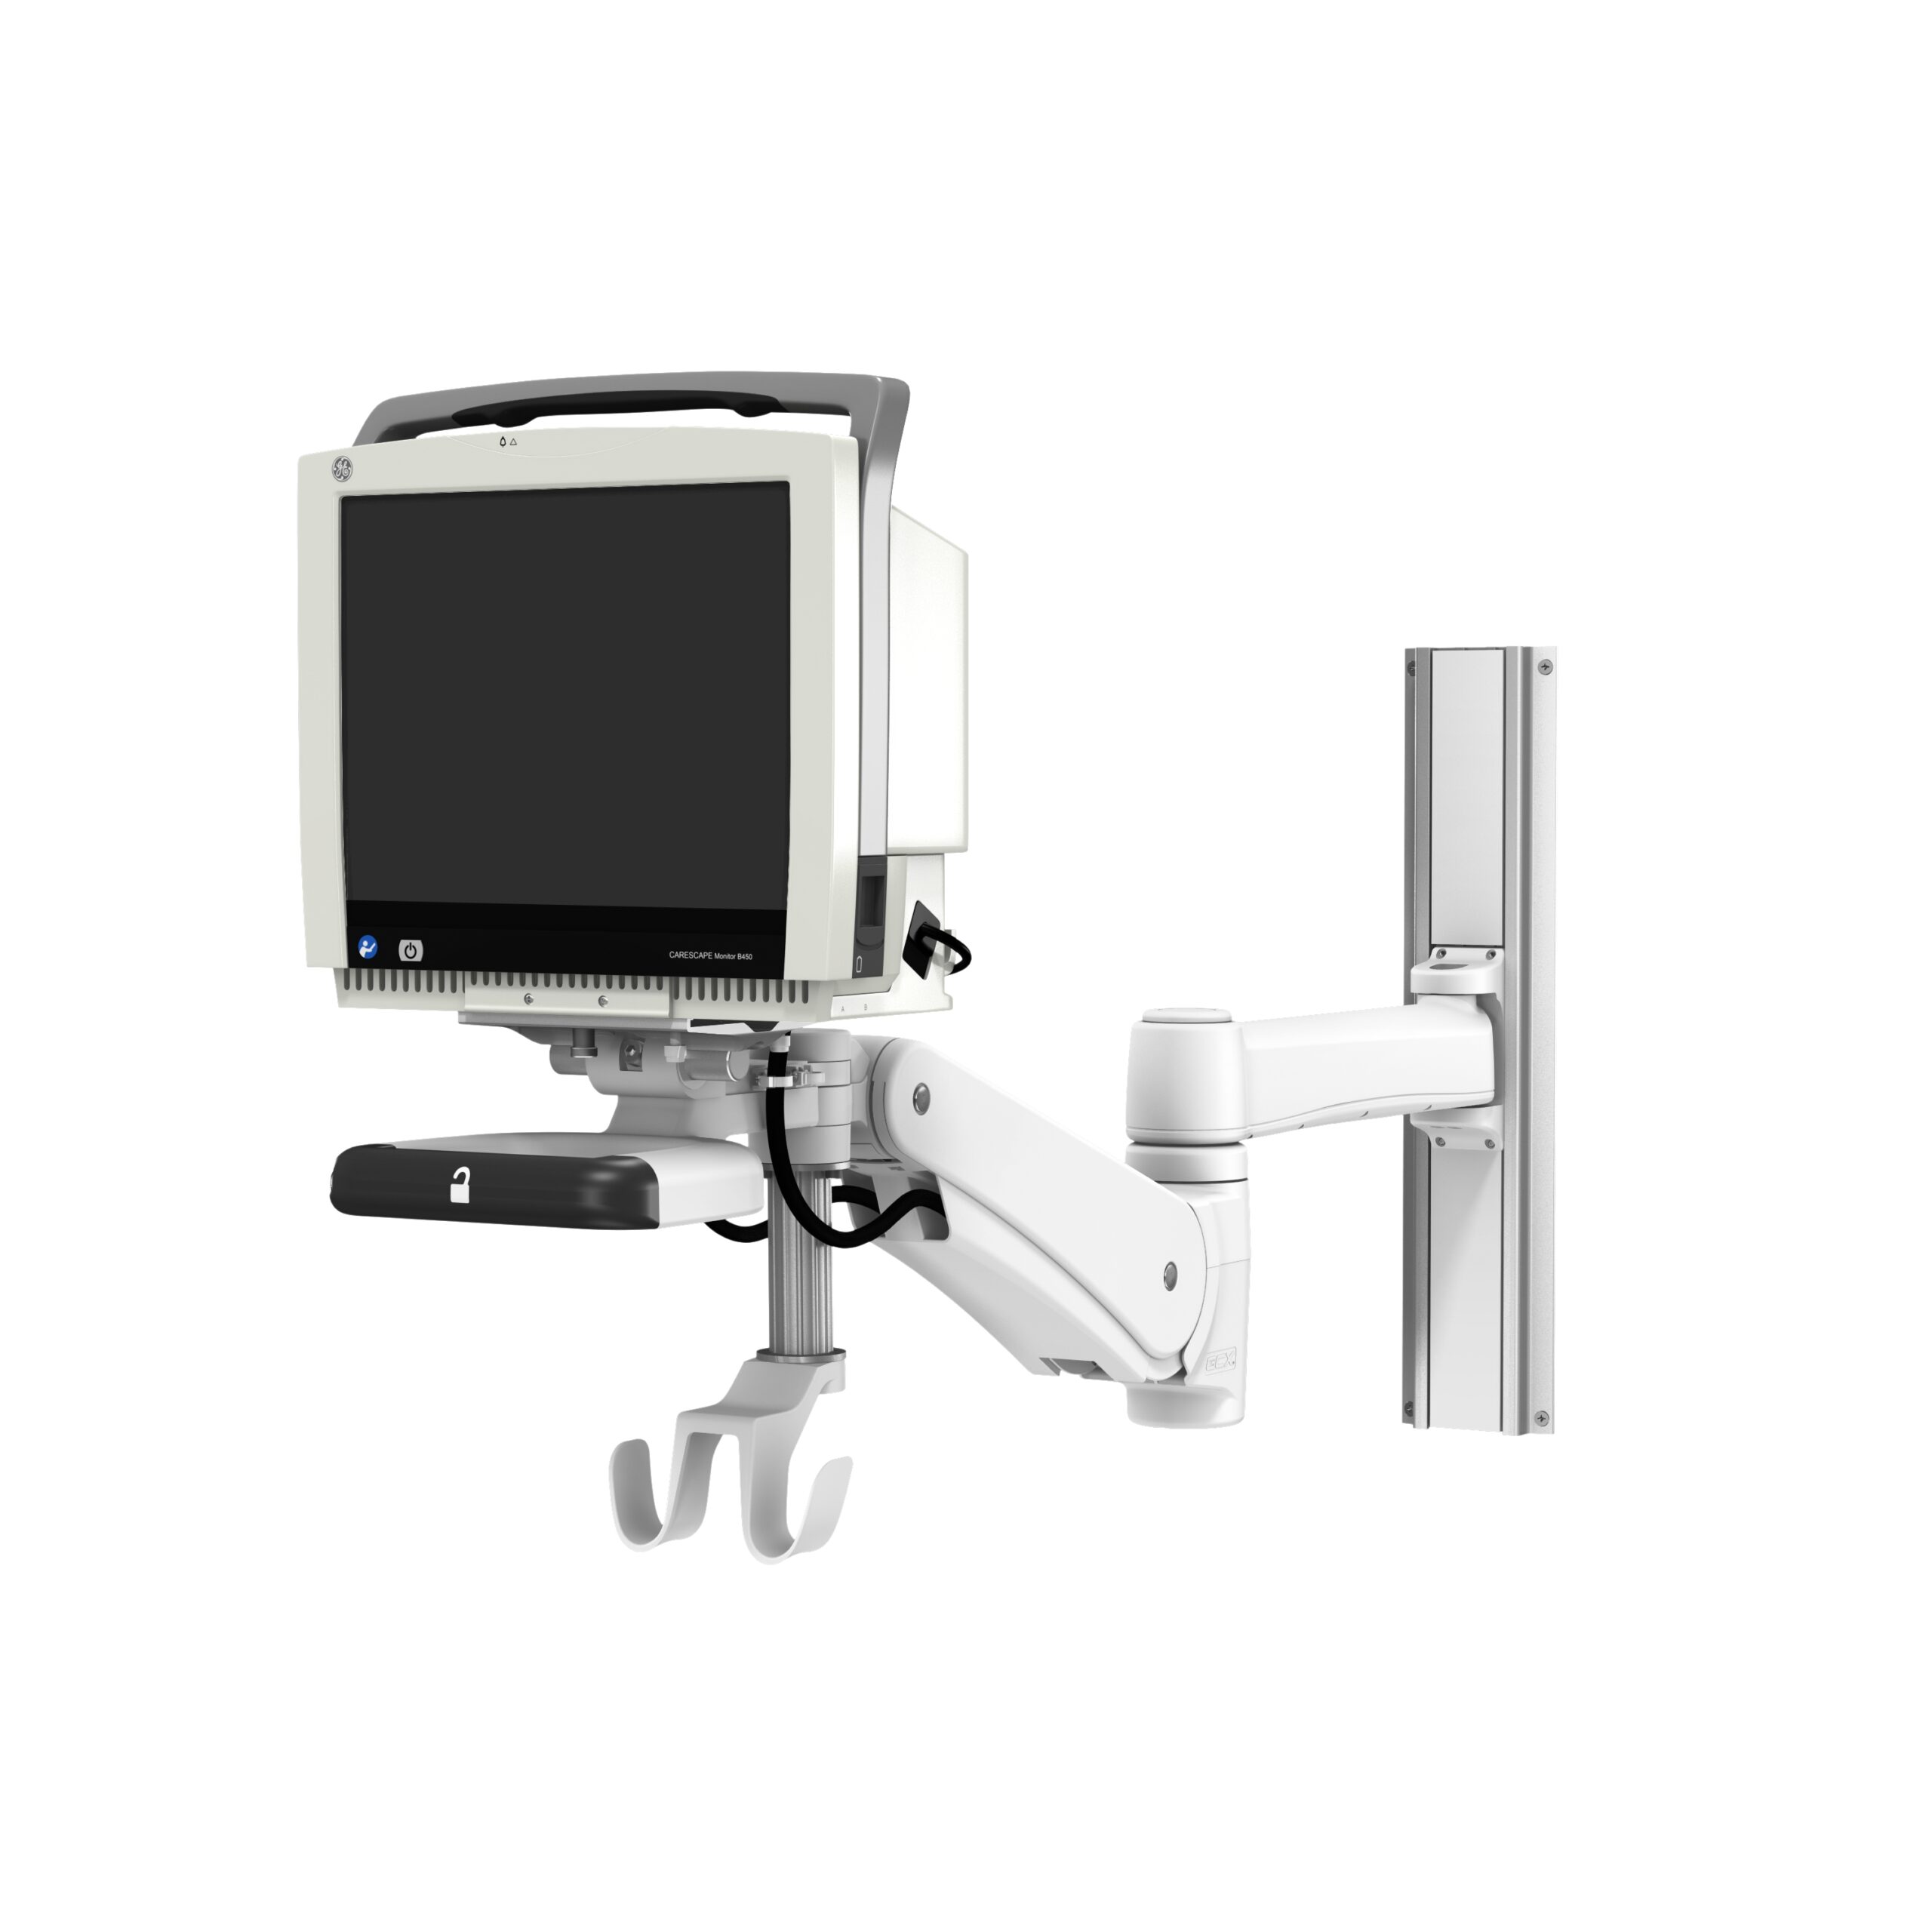 GE CARESCAPE Monitor B450 on VHM-PL Variable Height Arm Channel Mount with Vertical Position Lock with dual cable hooks and 14